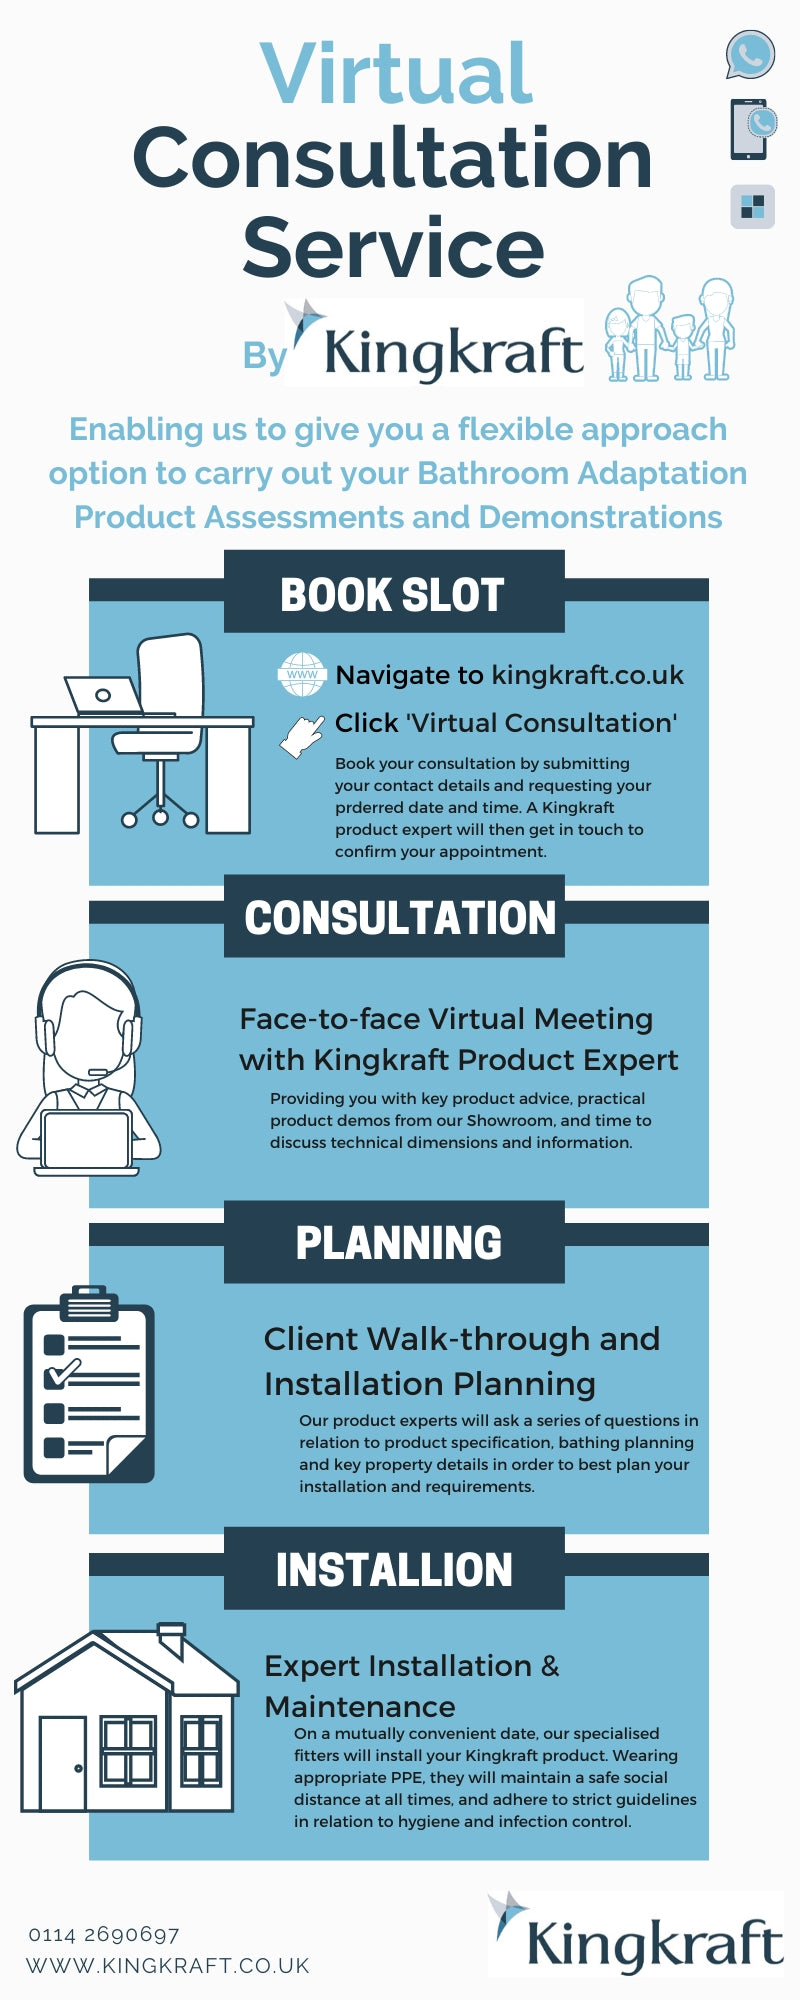 Virtual Consultation Service By Kingkraft | Online face-to-face product assessments and demonstration | Height Adjustable Baths, Basins and Changing Tables